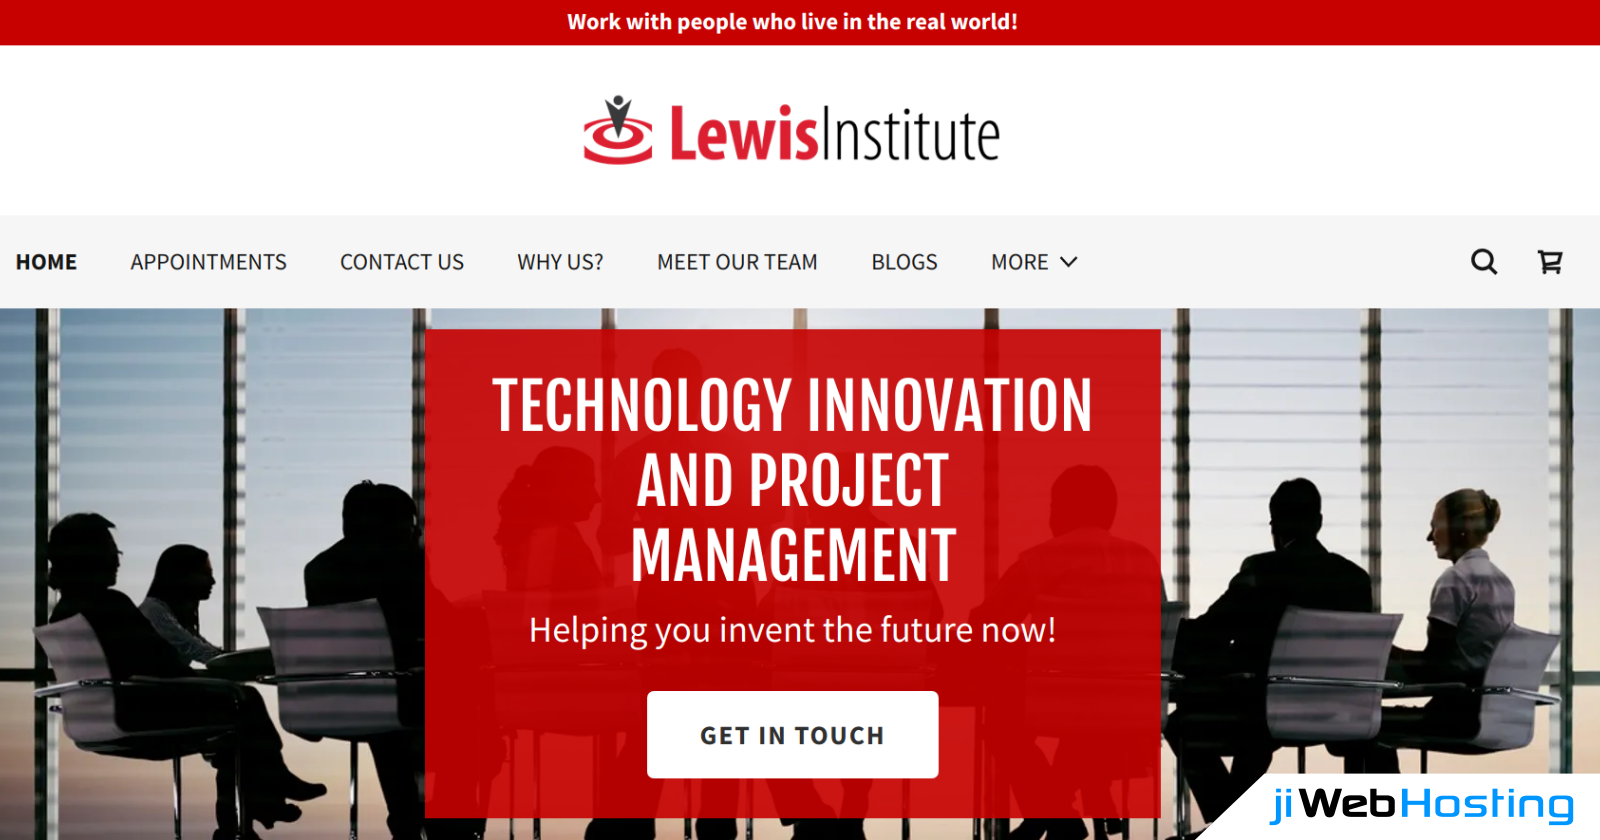 How Lewis Institute Attained Heights With Help of jiWebHosting